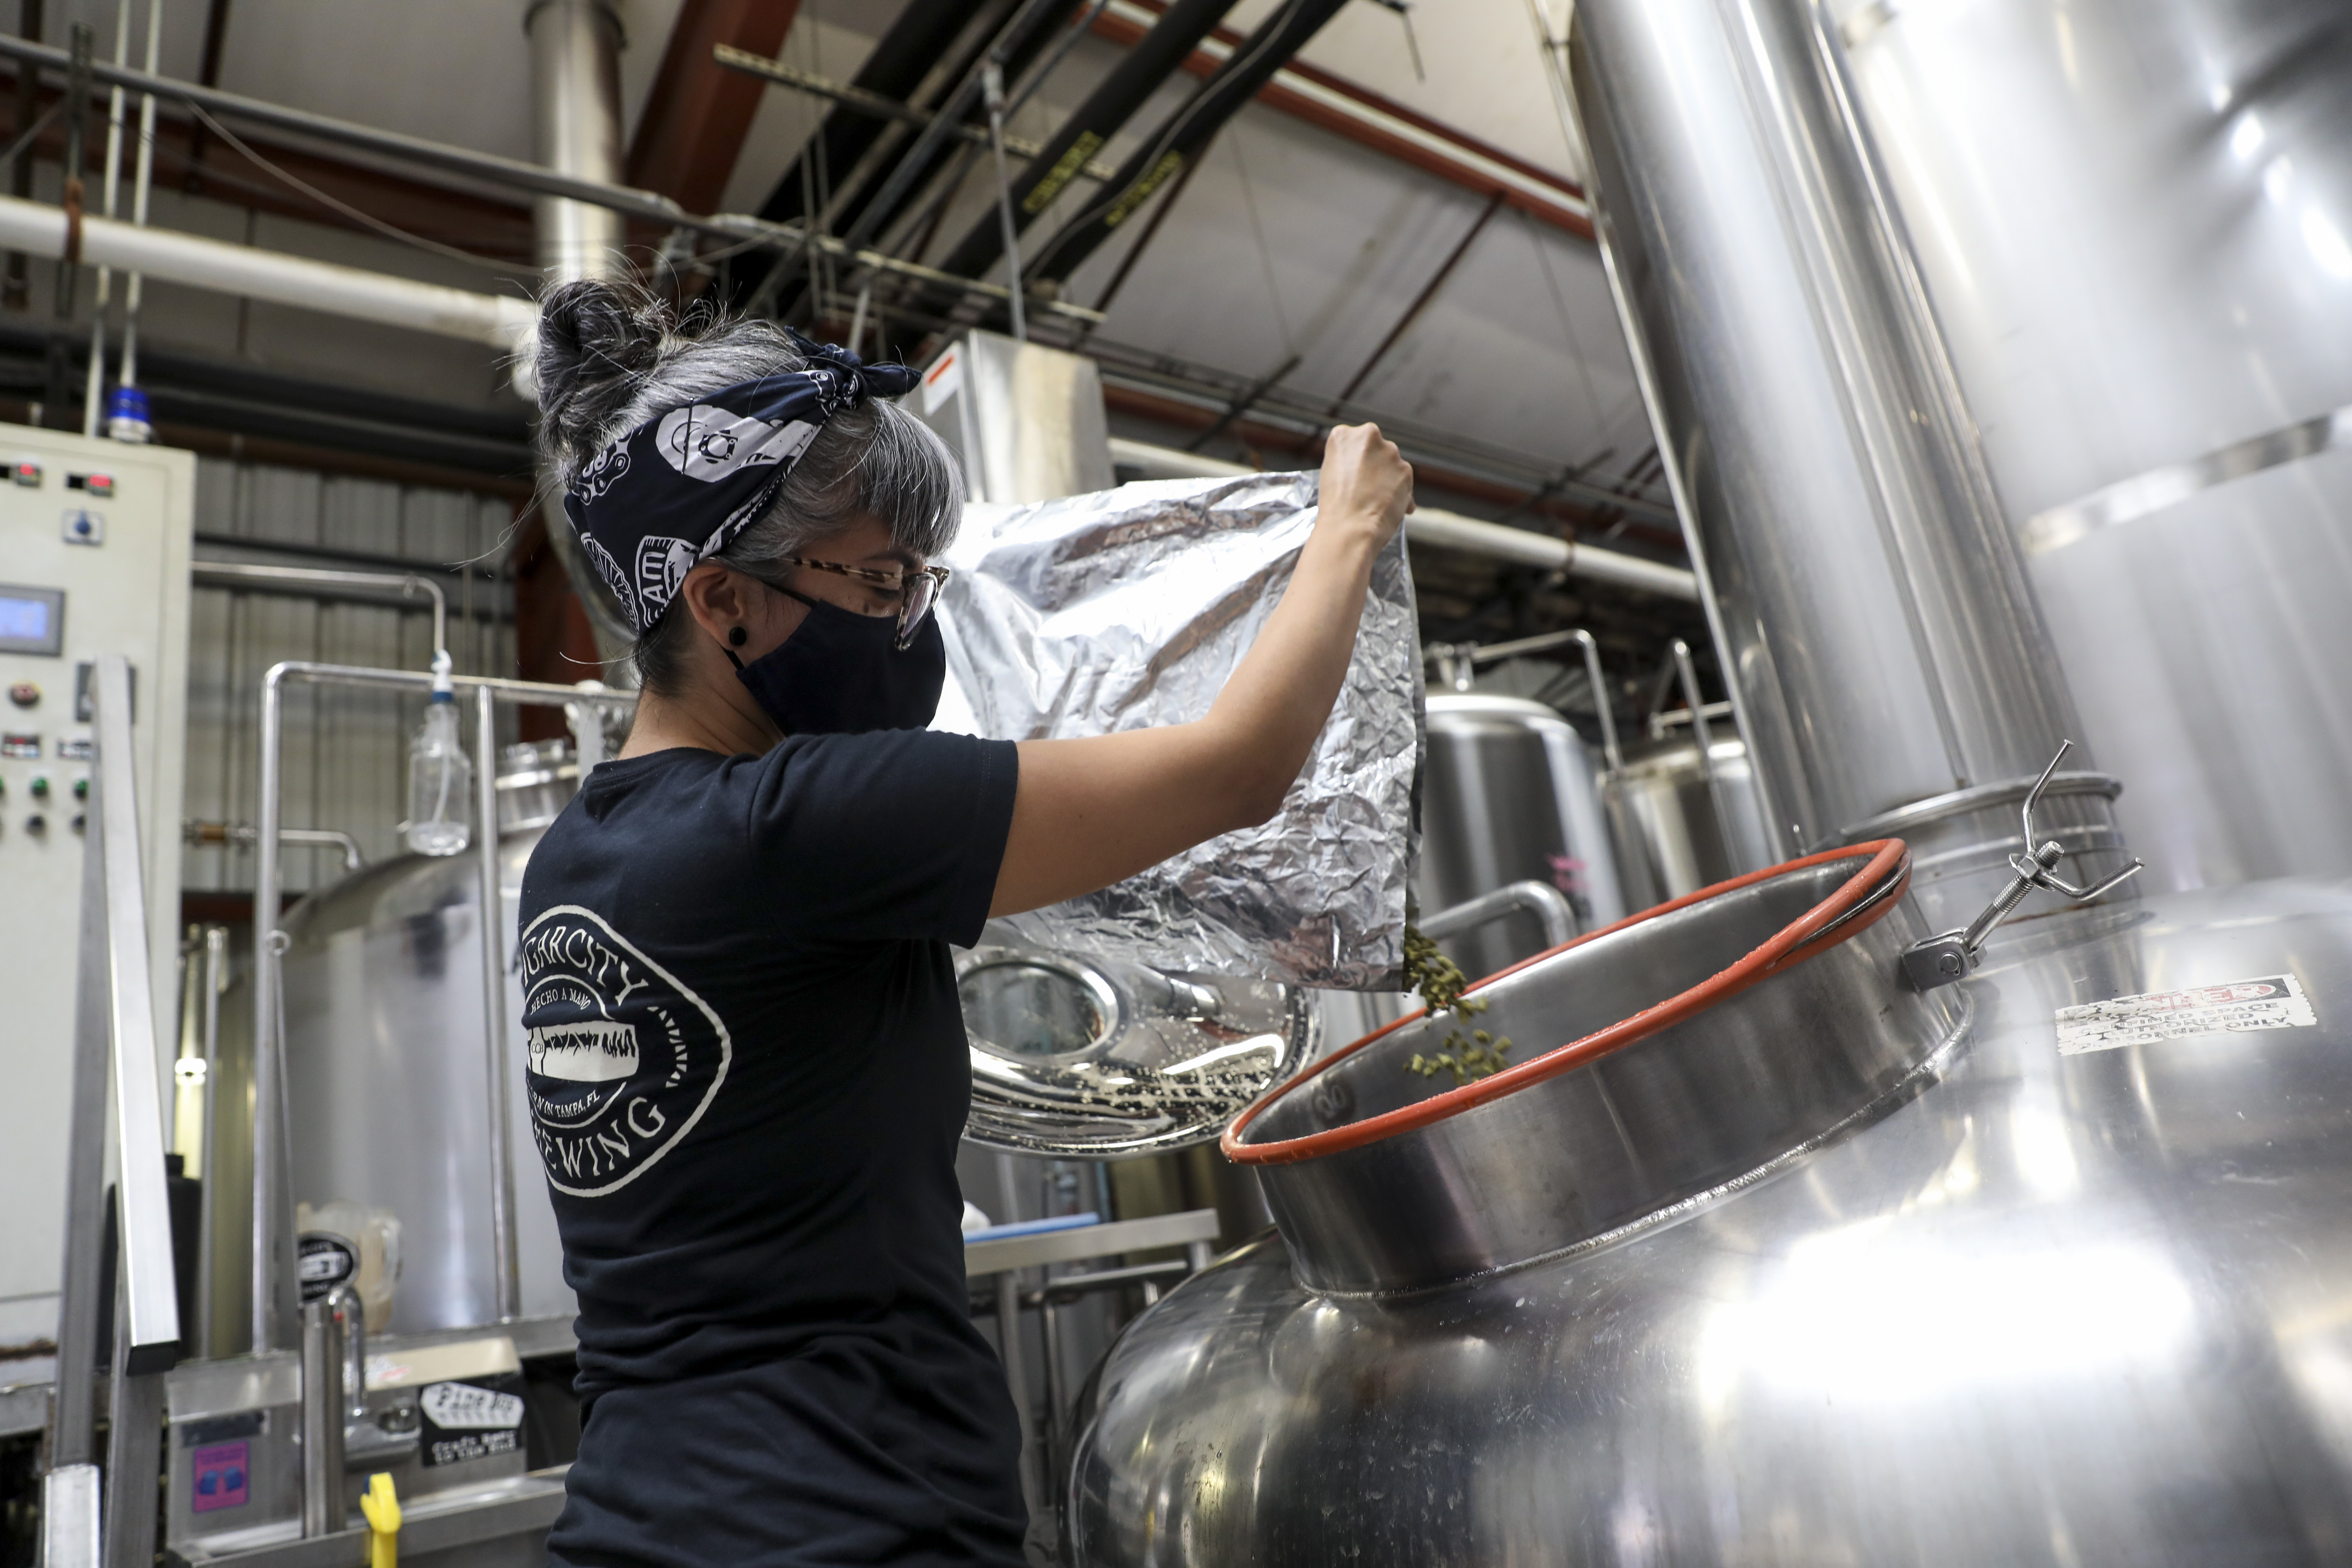 For women in Tampa Bays craft beer world, progress amid struggle photo